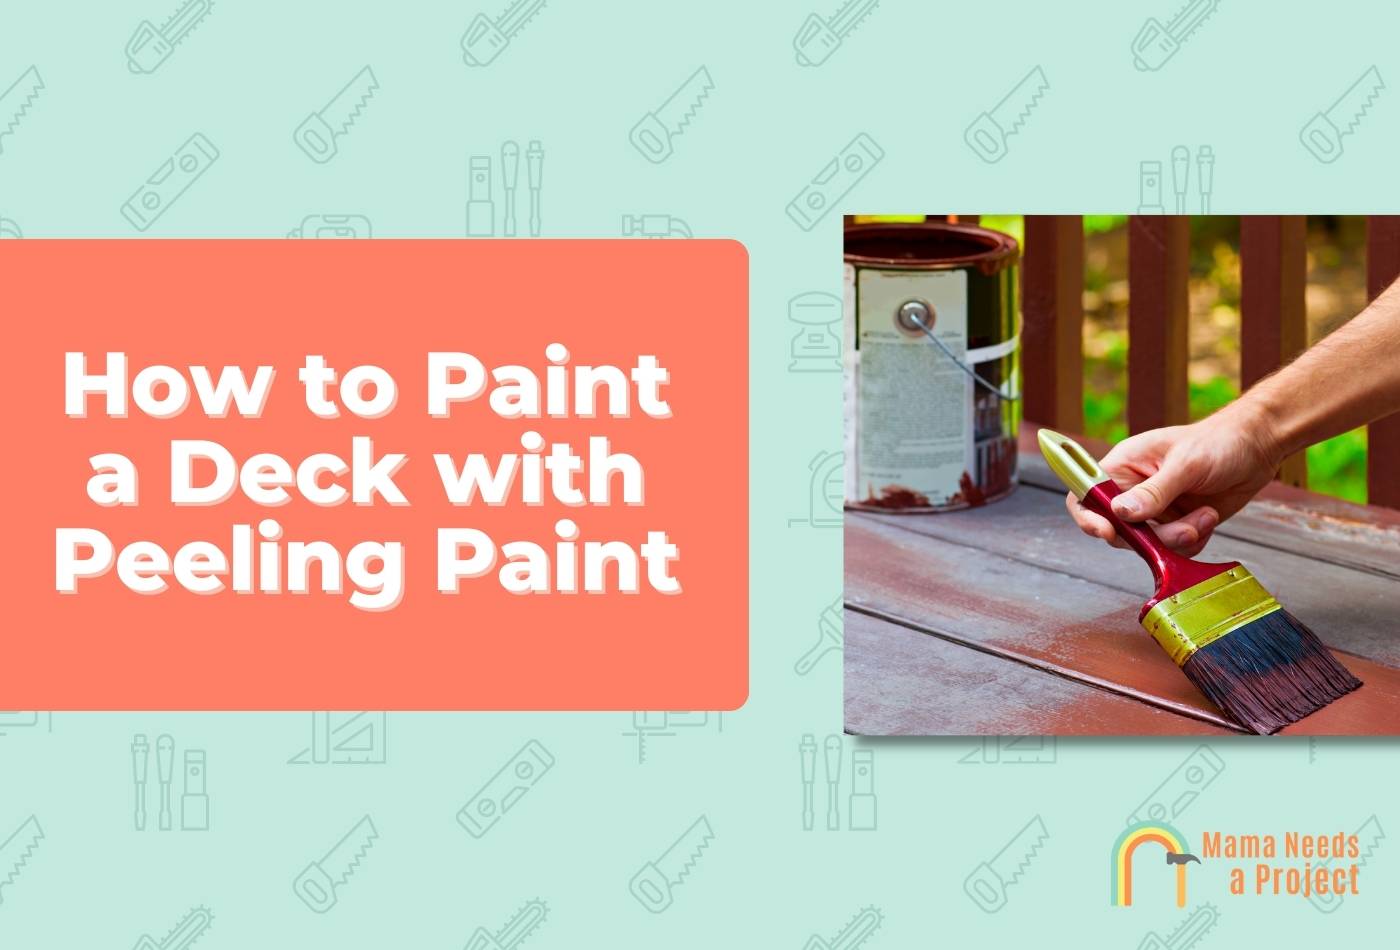 Painting a Deck with Peeling Paint